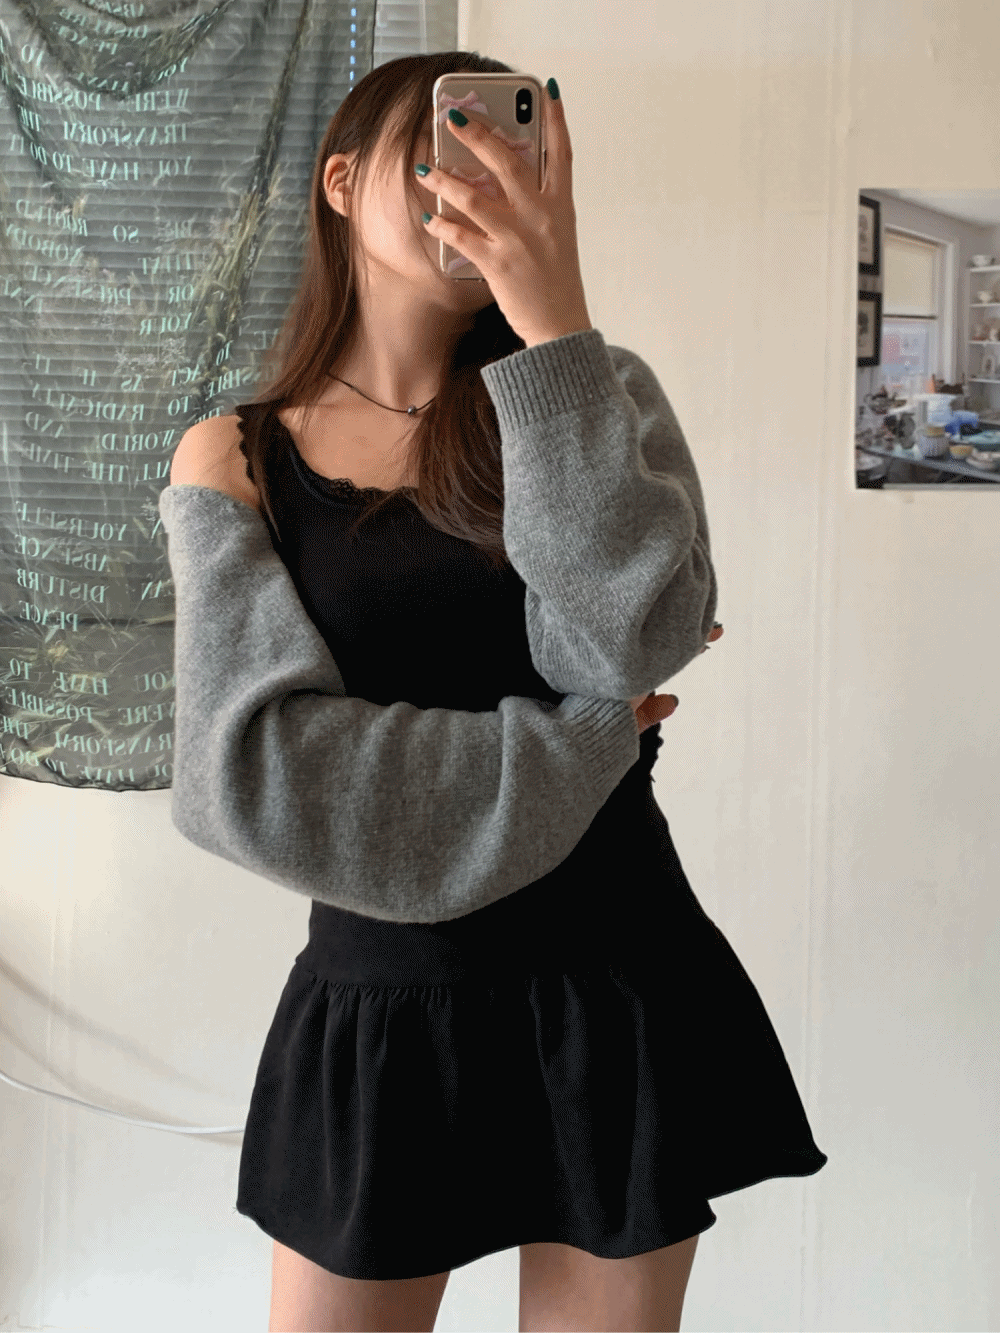 [Outer] Lily bolero cardigan / 2 colors